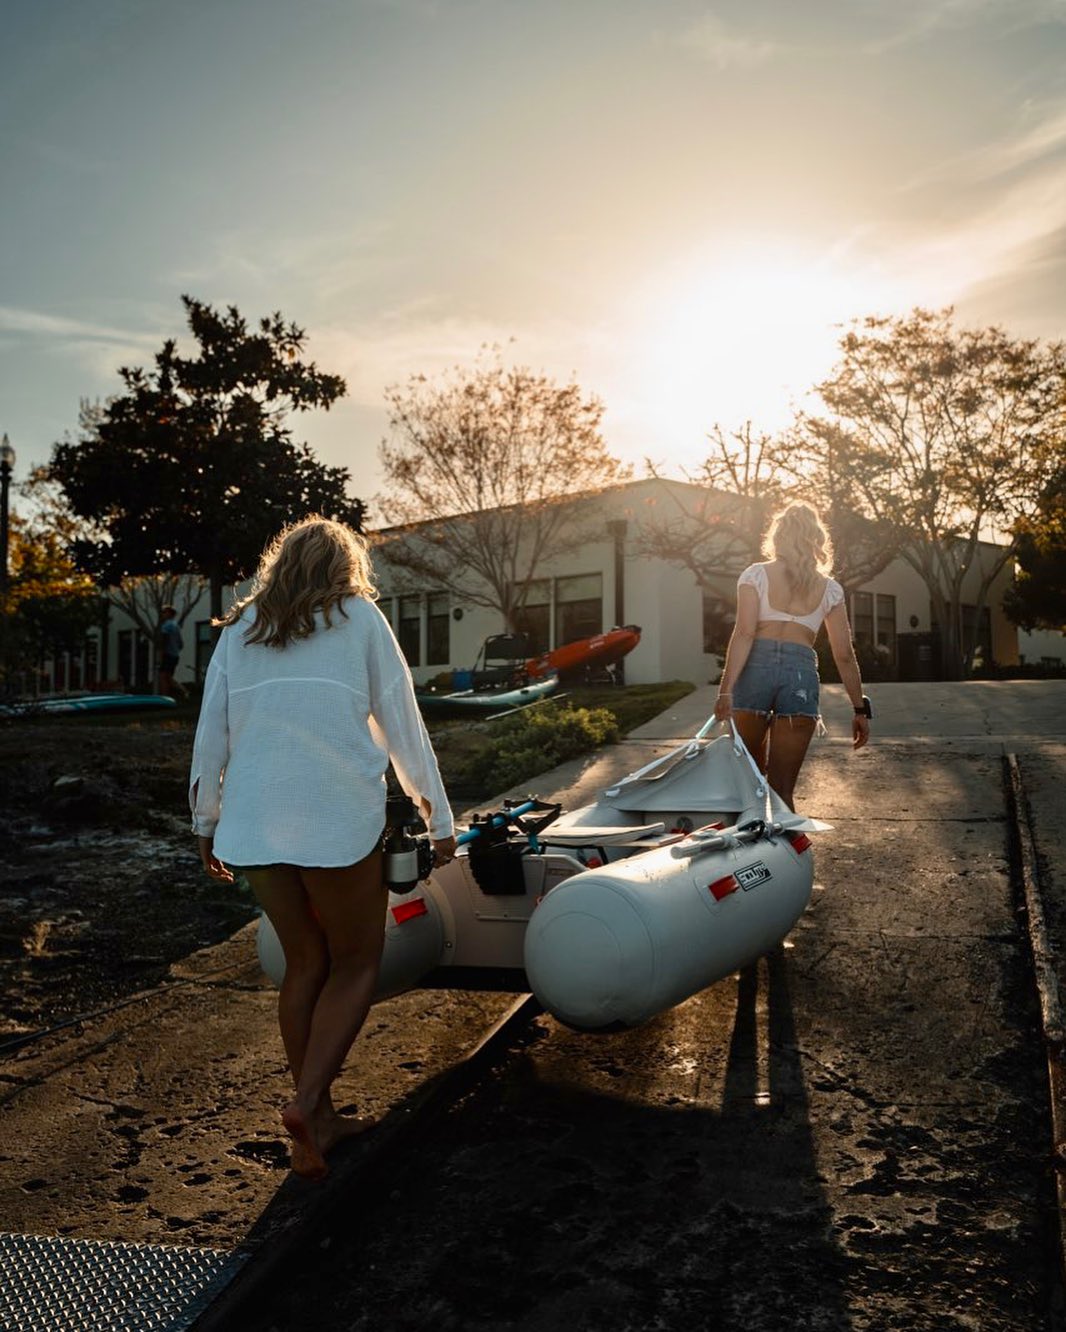 Two women carry inflatable boat featuring Bixpy motor